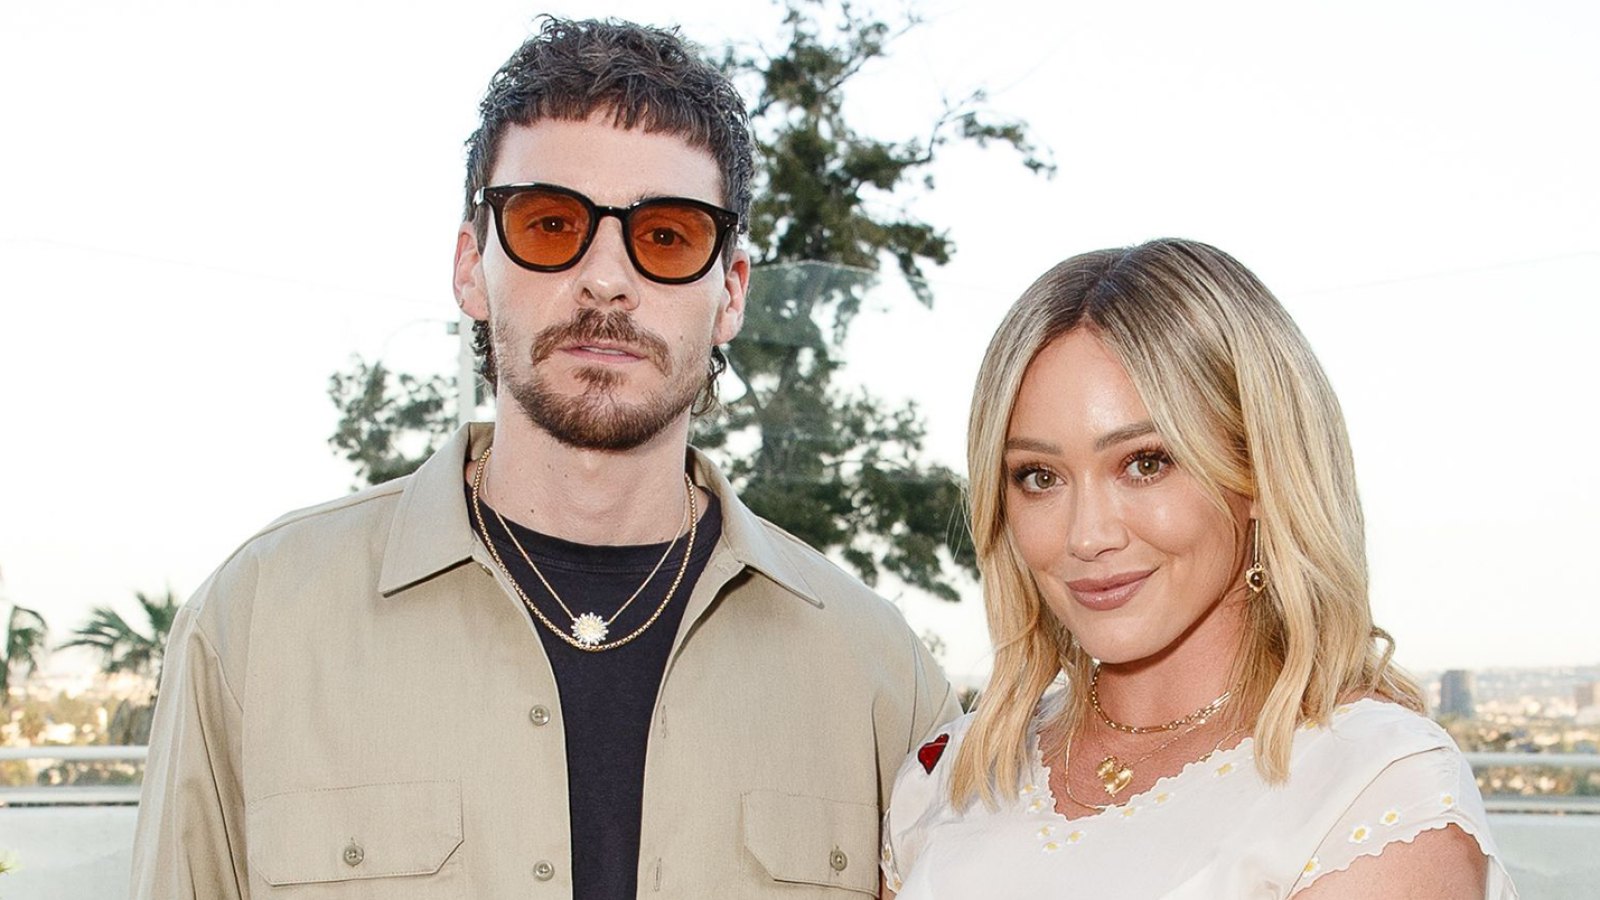 Hilary Duff Is Unimpressed With Husband Matthew Koma's Jokes About 'Living in the Eye of Hurricane Hilary'